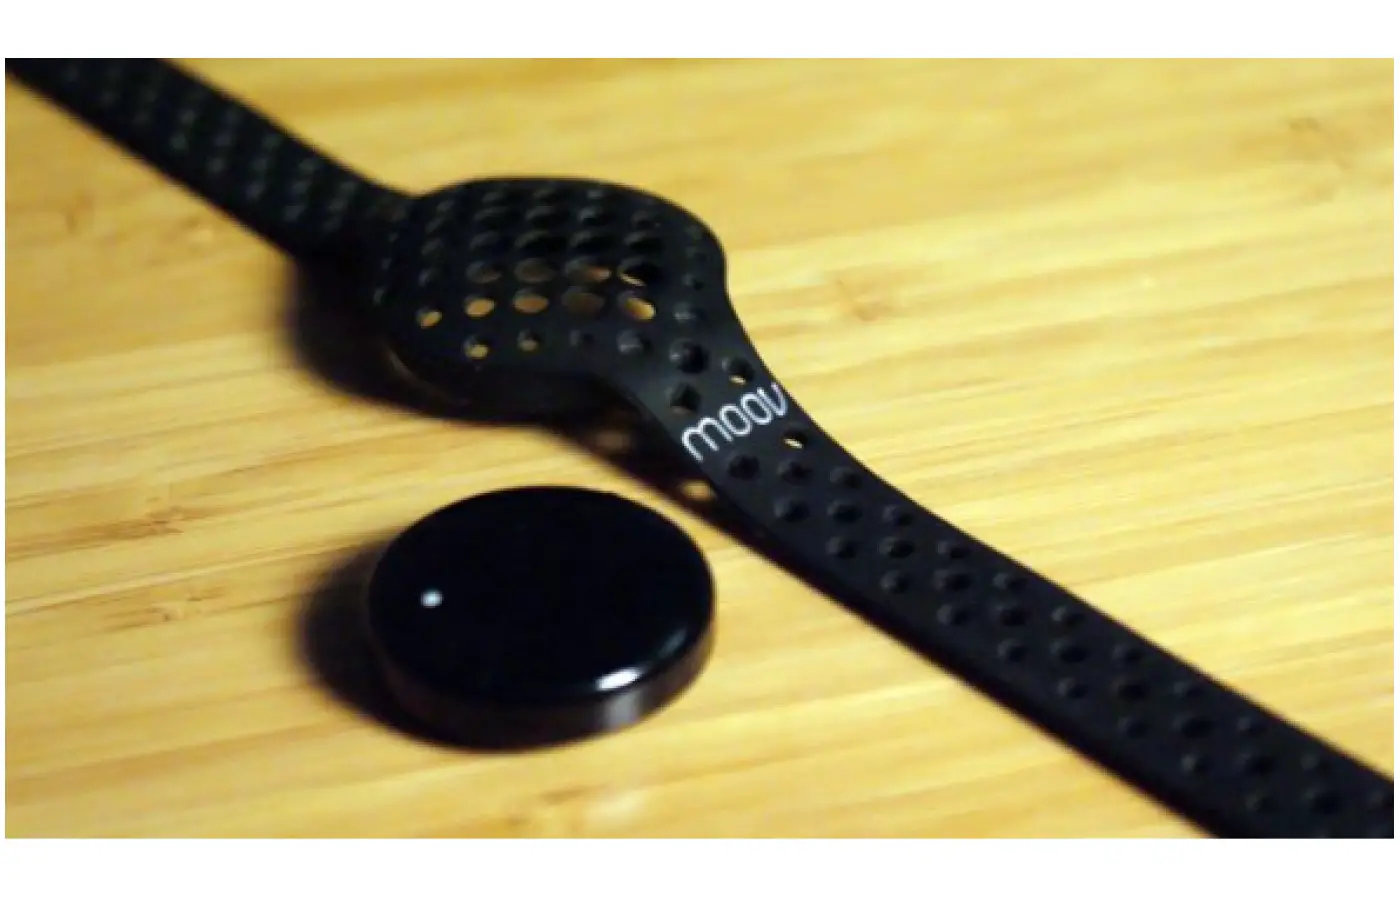 The device is the small disk inserted into a soft rubber wristband.